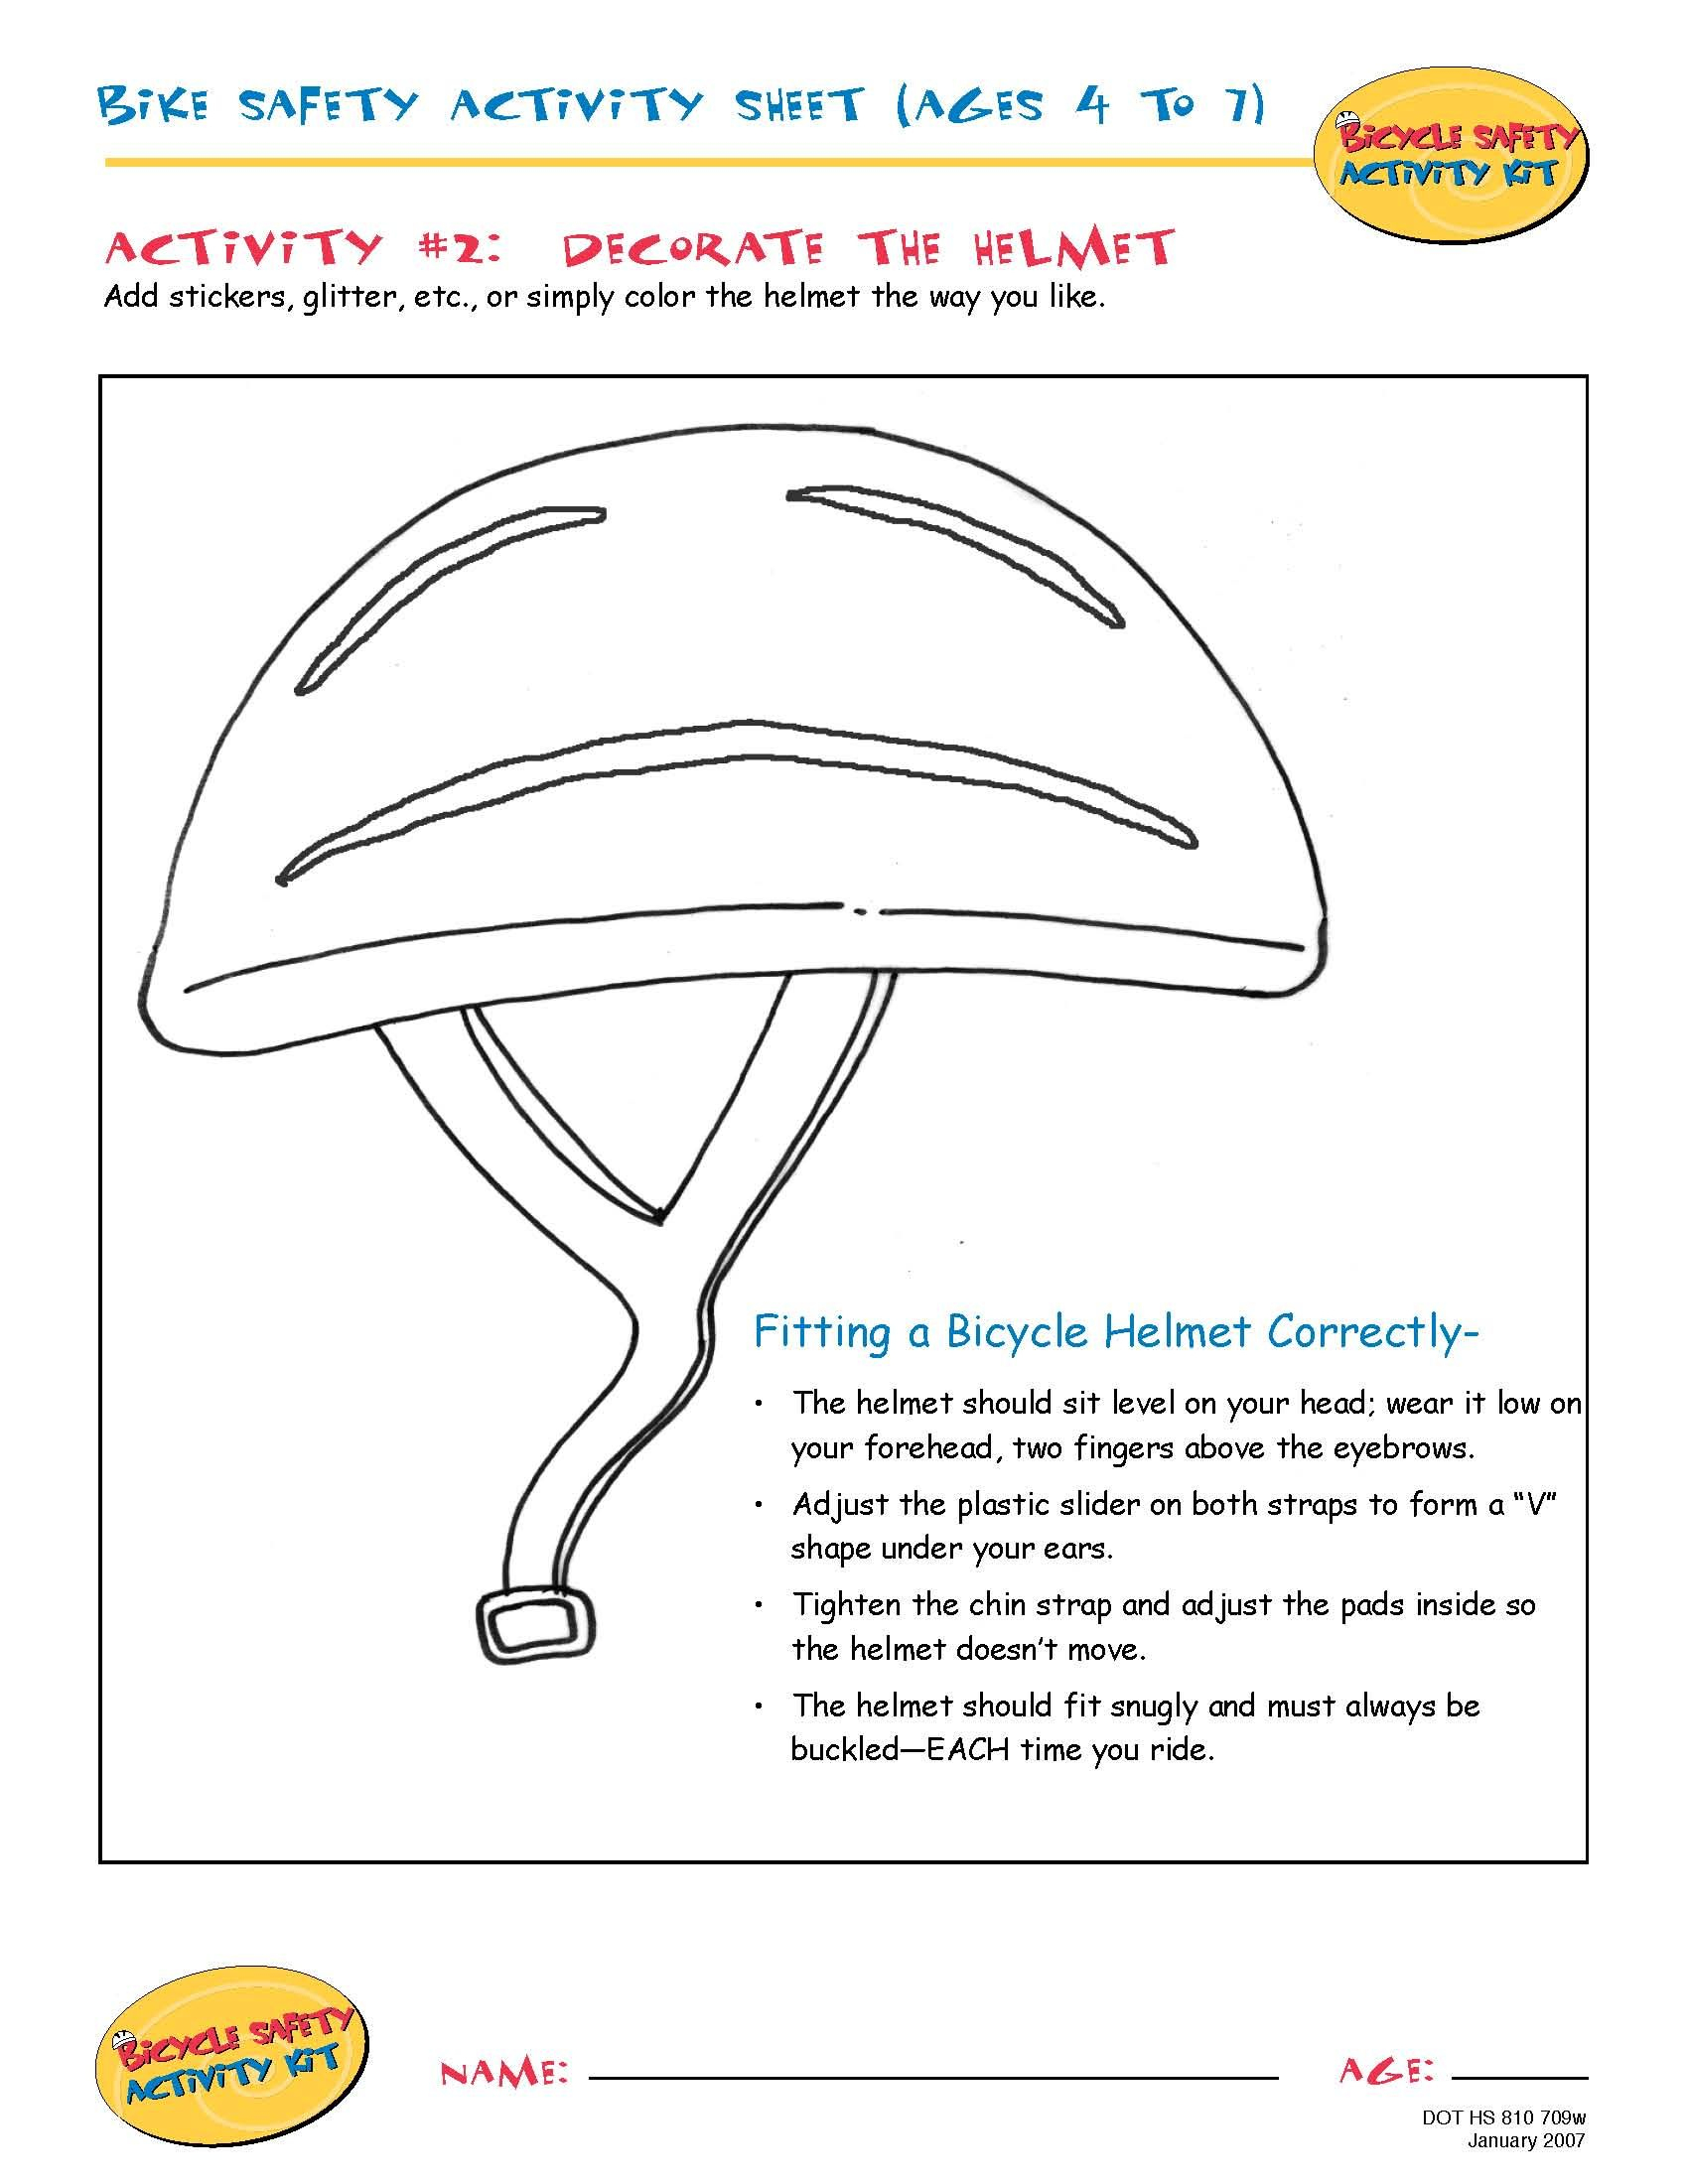 Bike Safety Activity Sheet (Ages 4 To 7): Decorate The